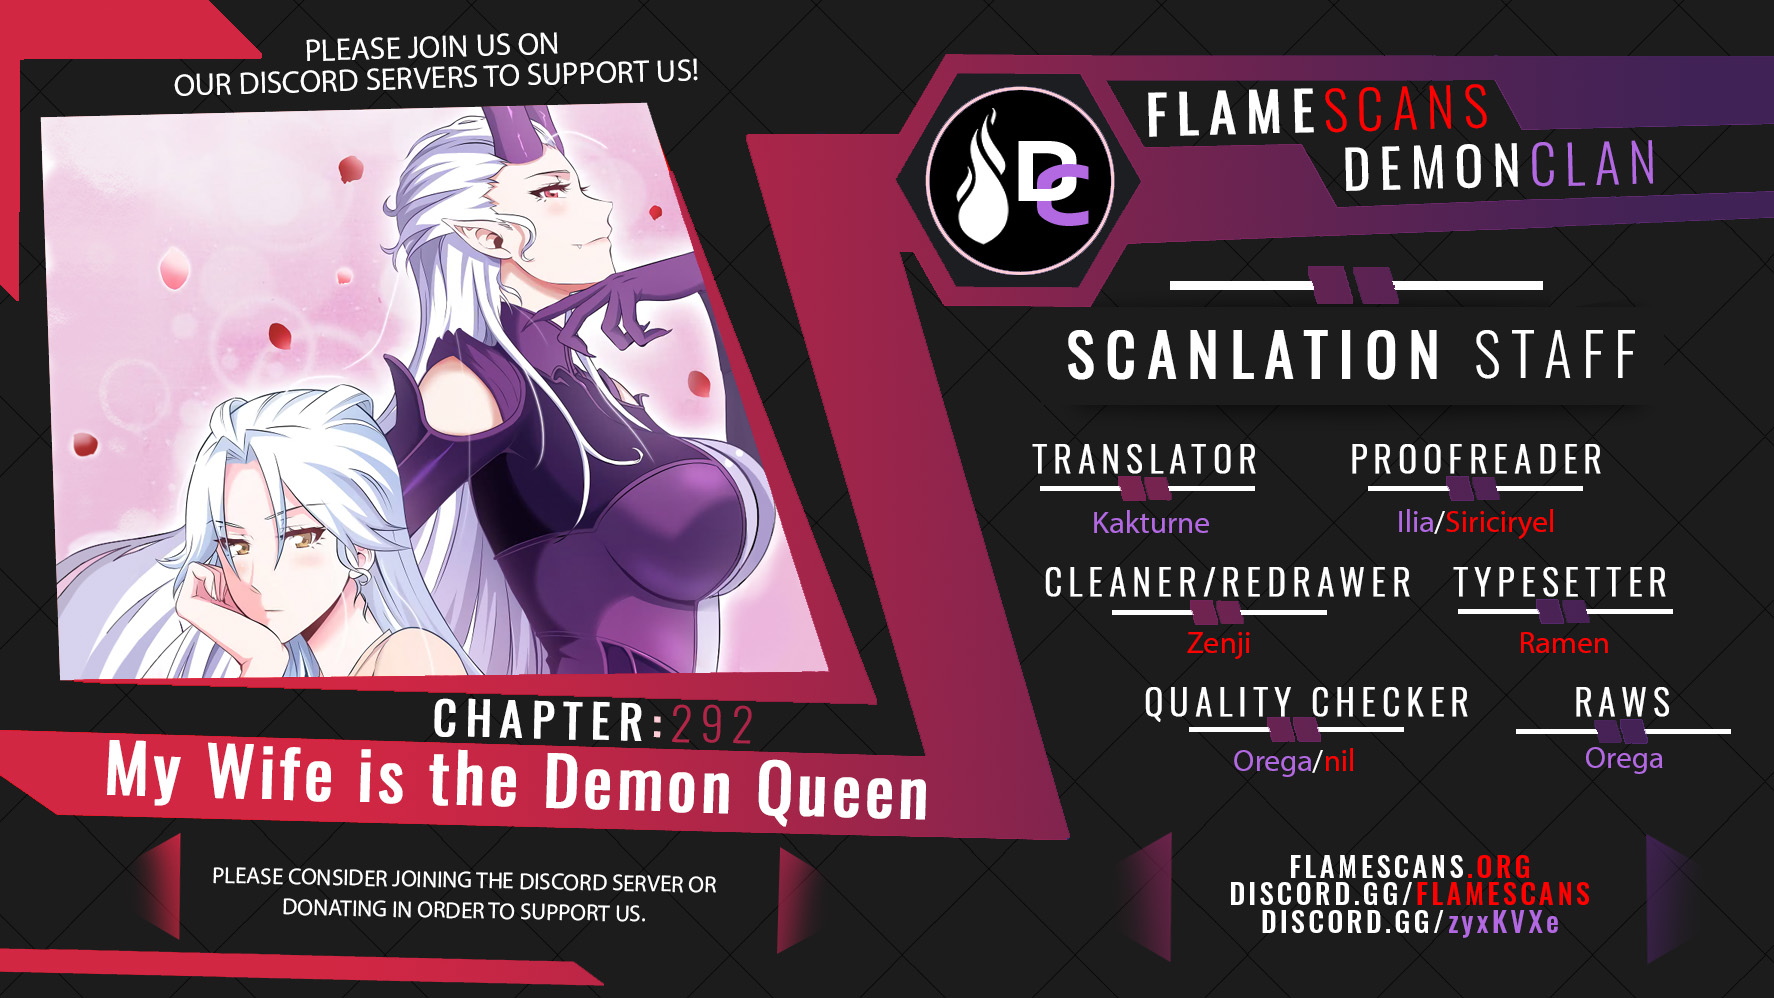 My Wife is a Demon Queen - Chapter 9784 - Image 1